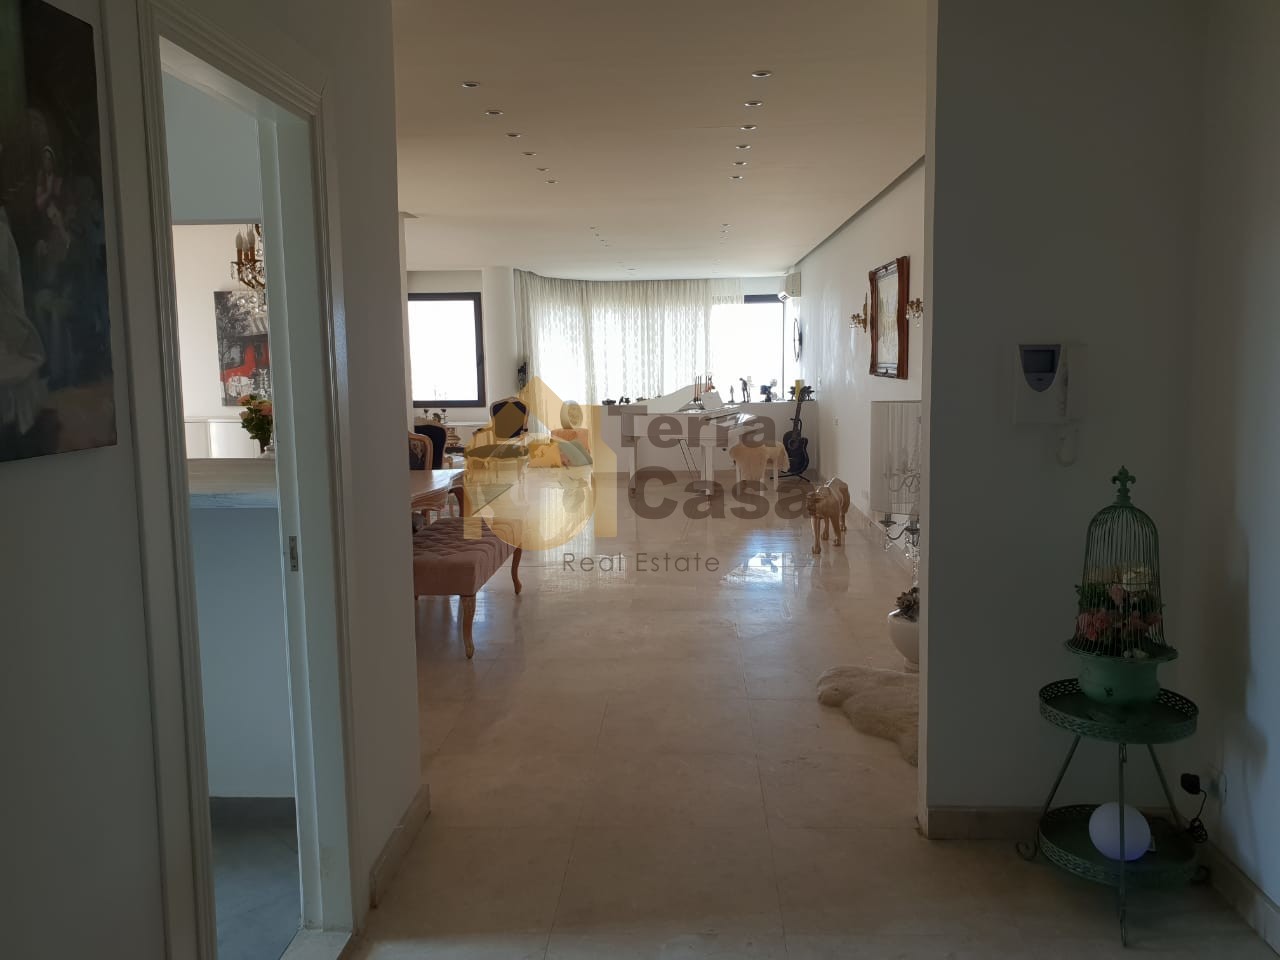 Apartment for sale in jal El Dib fully decorated with open sea view.